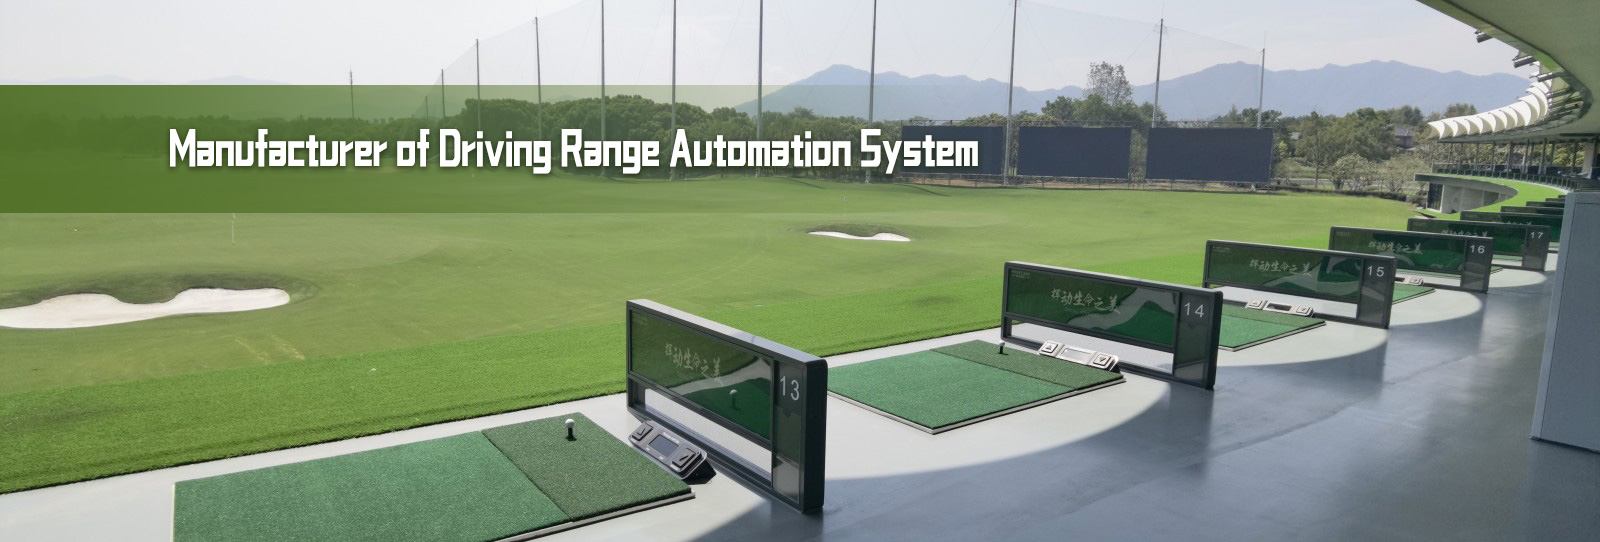 Manufacturer of Driving Range Automation System;